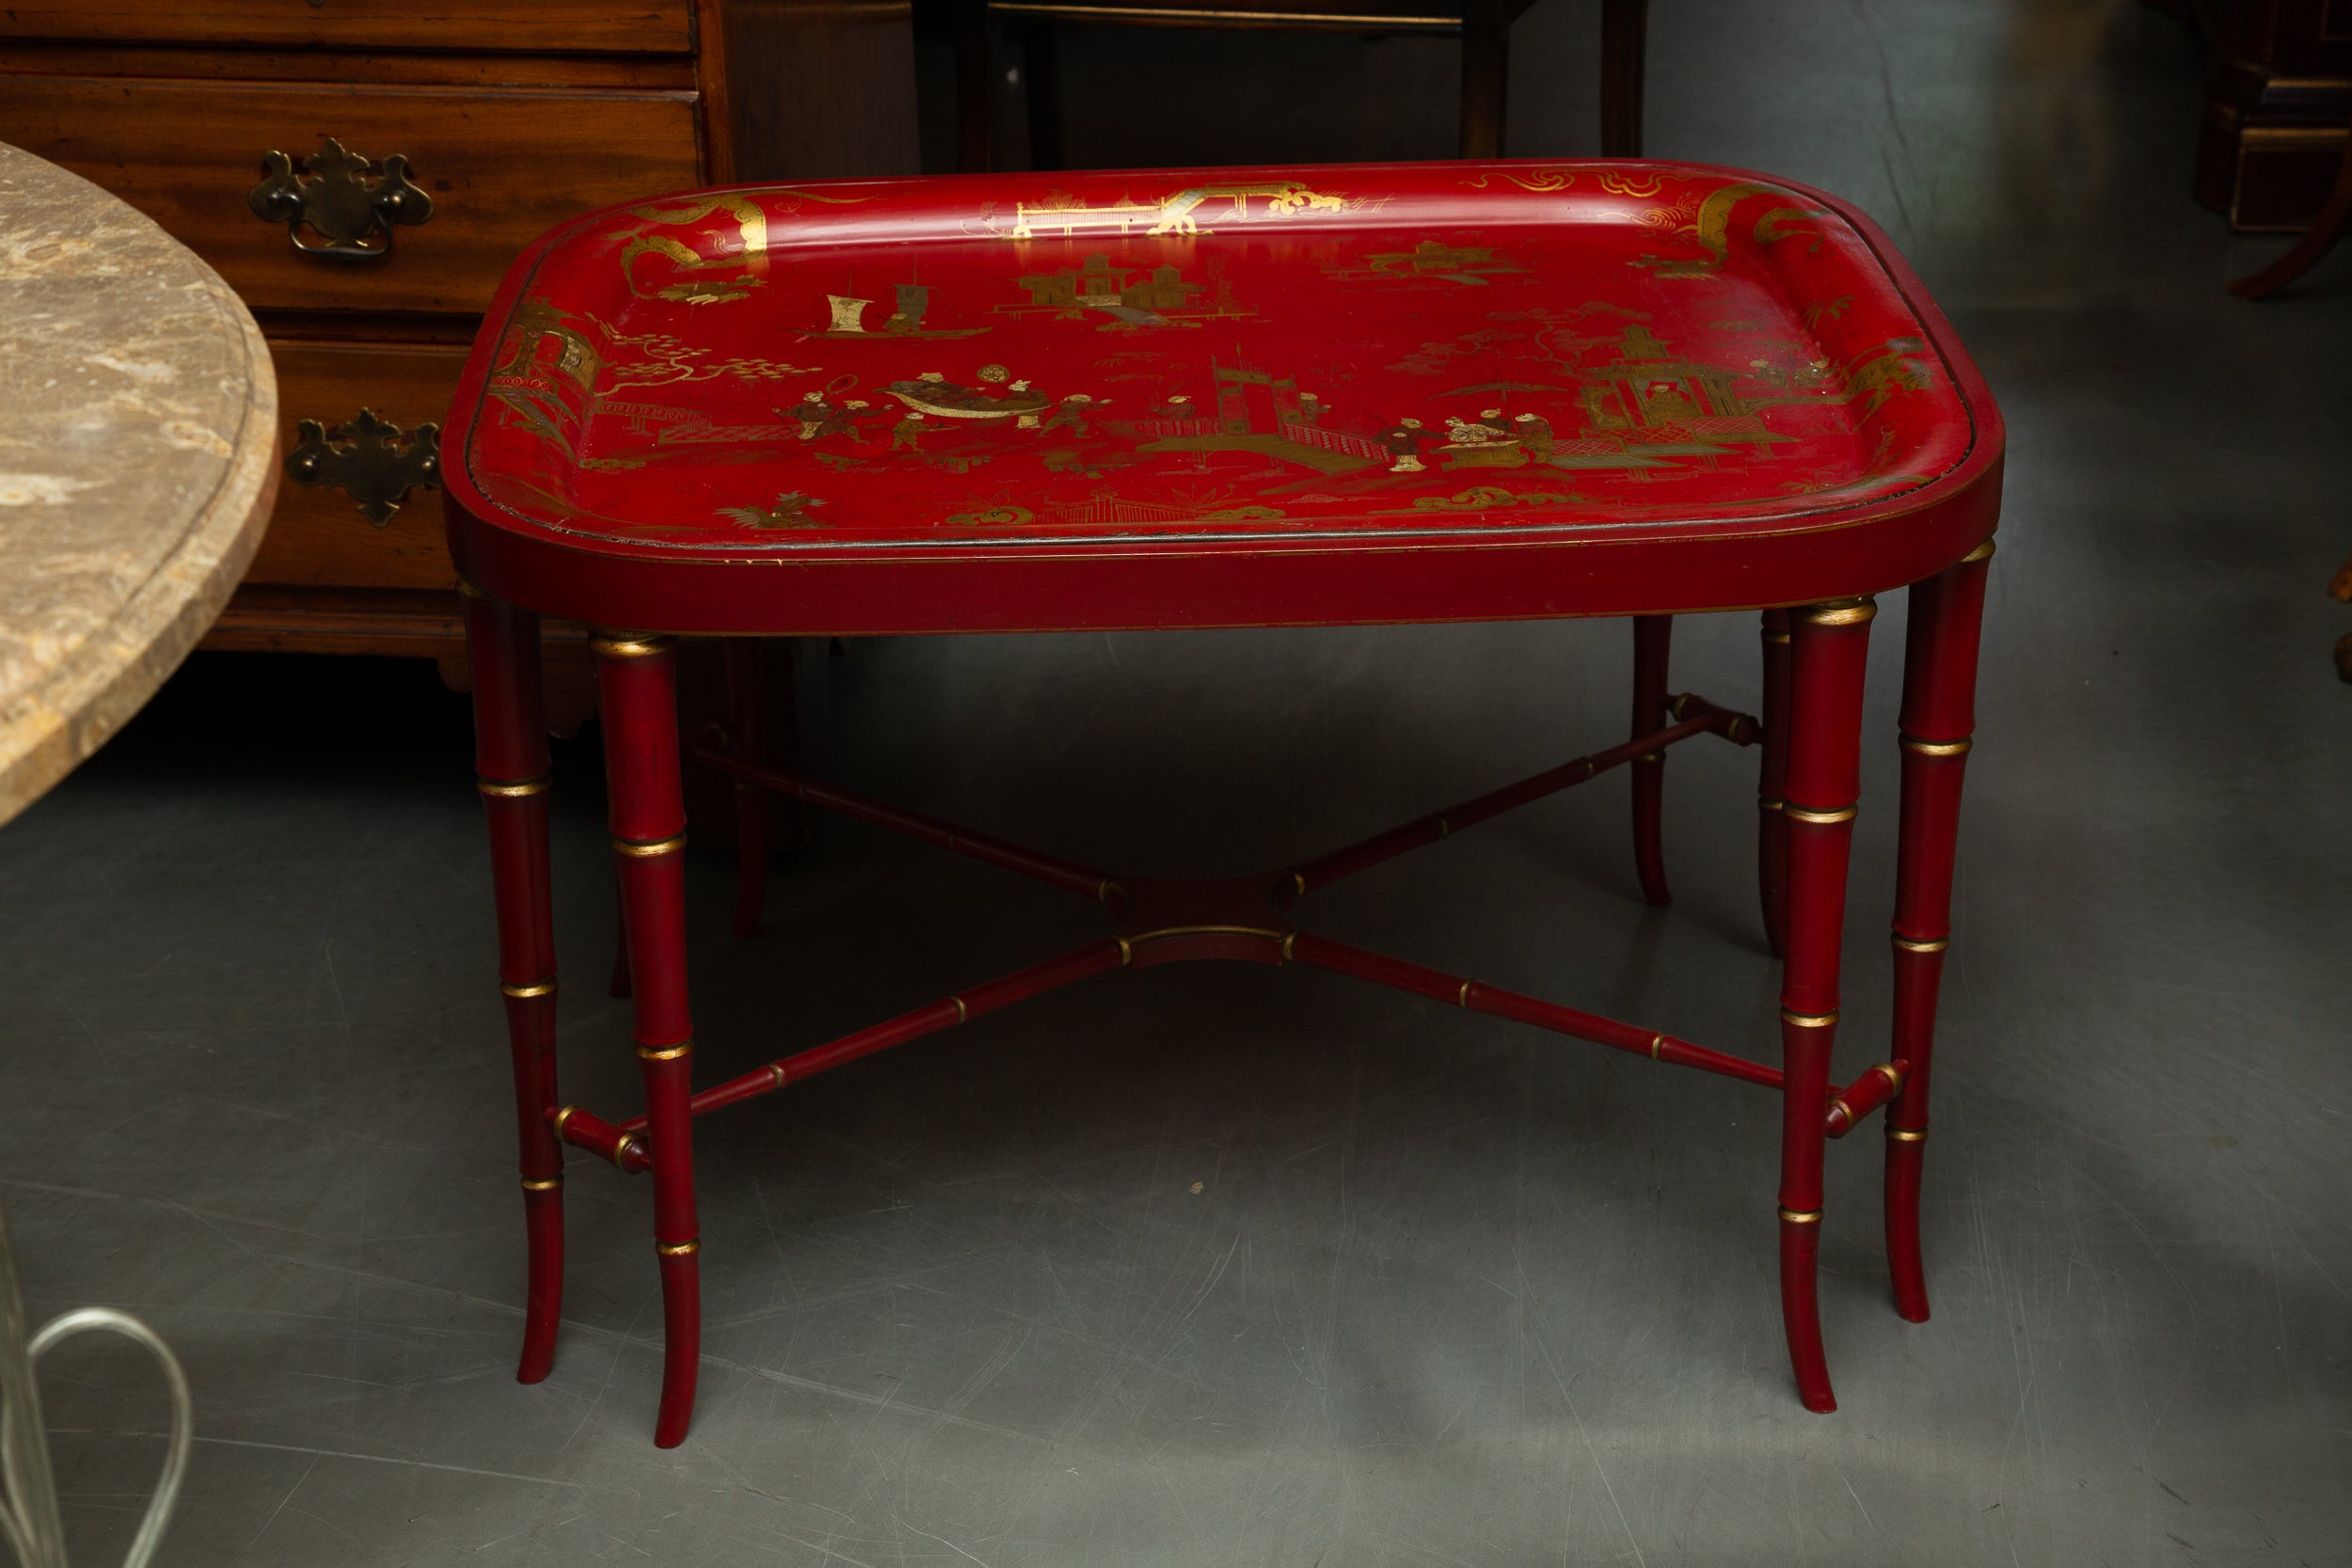 Pheromonal antique tomato red chinoiserie tray on a later painted tray.